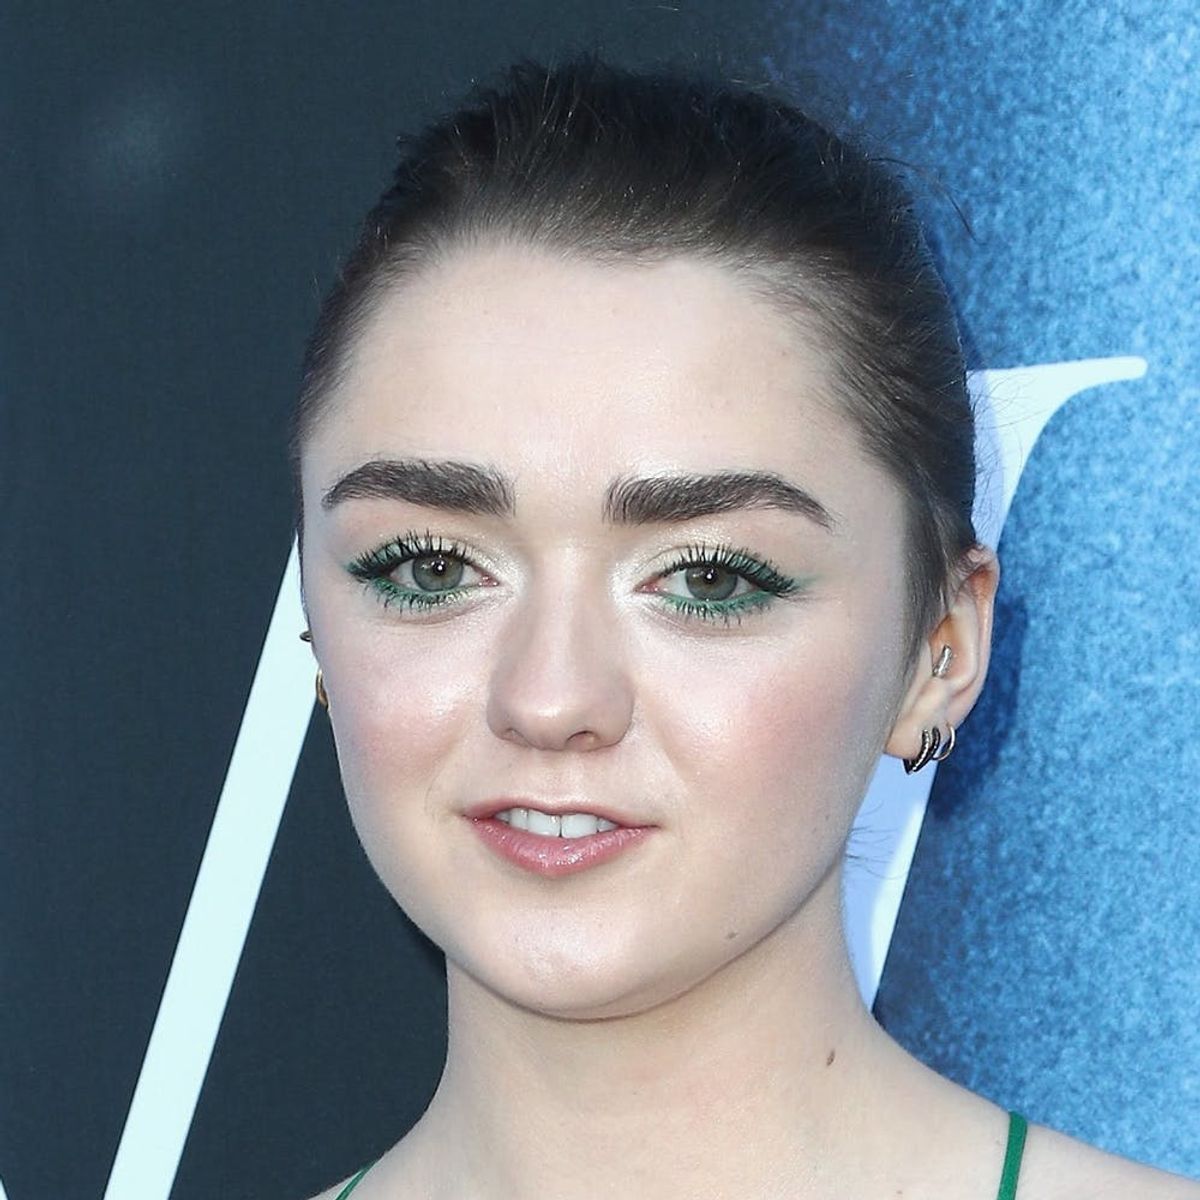 Maisie Williams Looks Just Like an Emoji and We’re Freaking Out